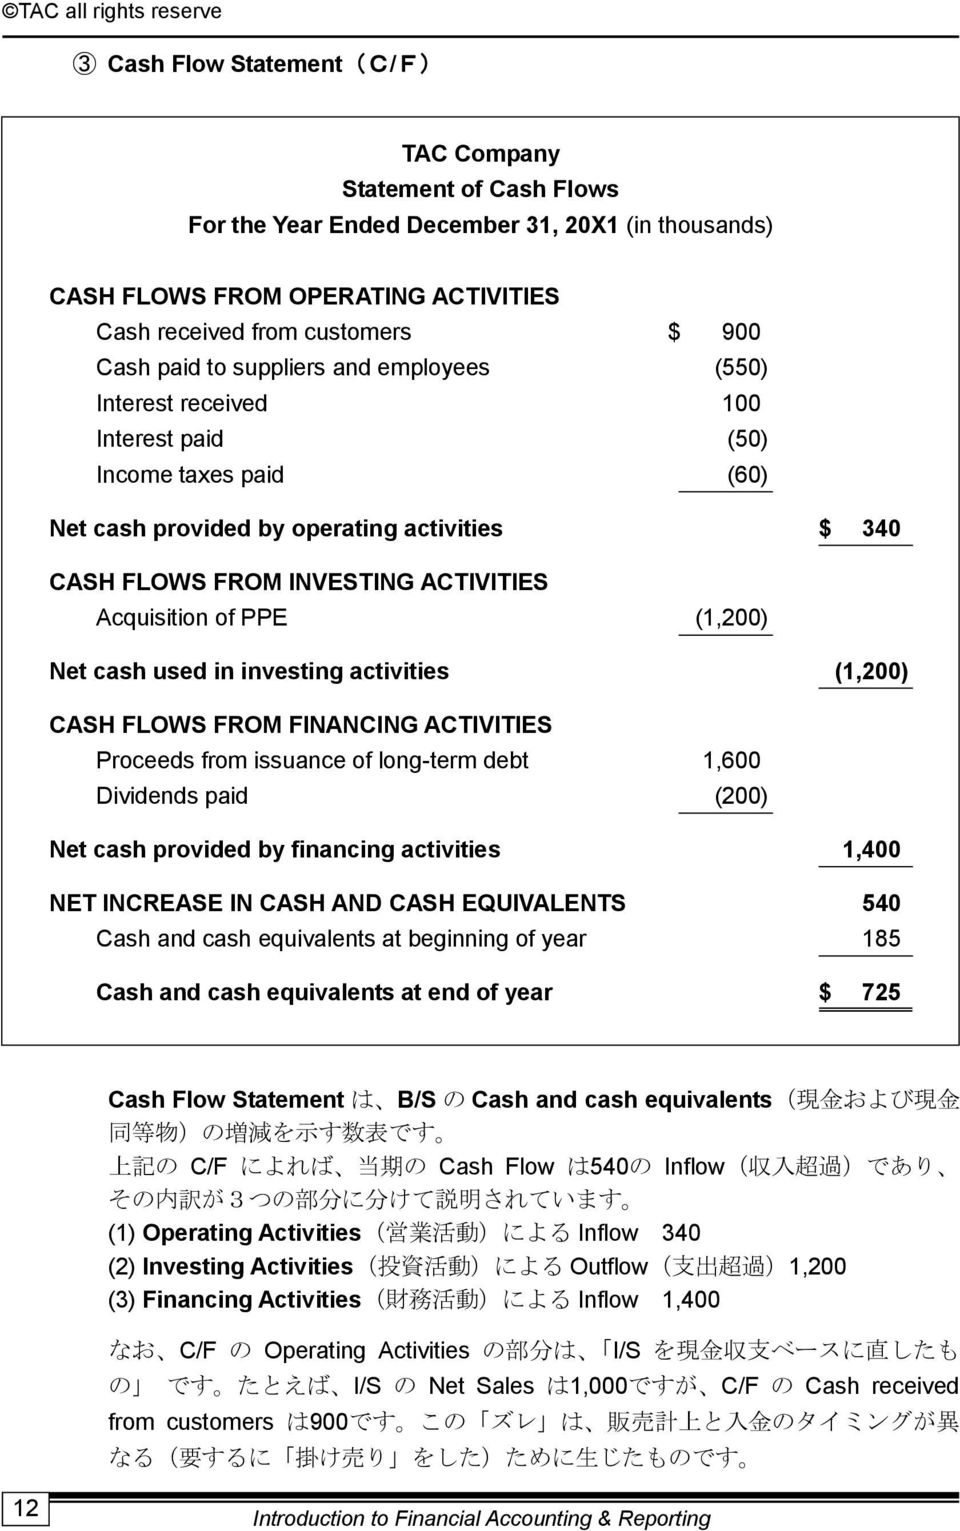 ACTIVITIES Acquisition of PPE (1,200) Net cash used in investing activities (1,200) CASH FLOWS FROM FINANCING ACTIVITIES Proceeds from issuance of long-term debt 1,600 Dividends paid (200) Net cash